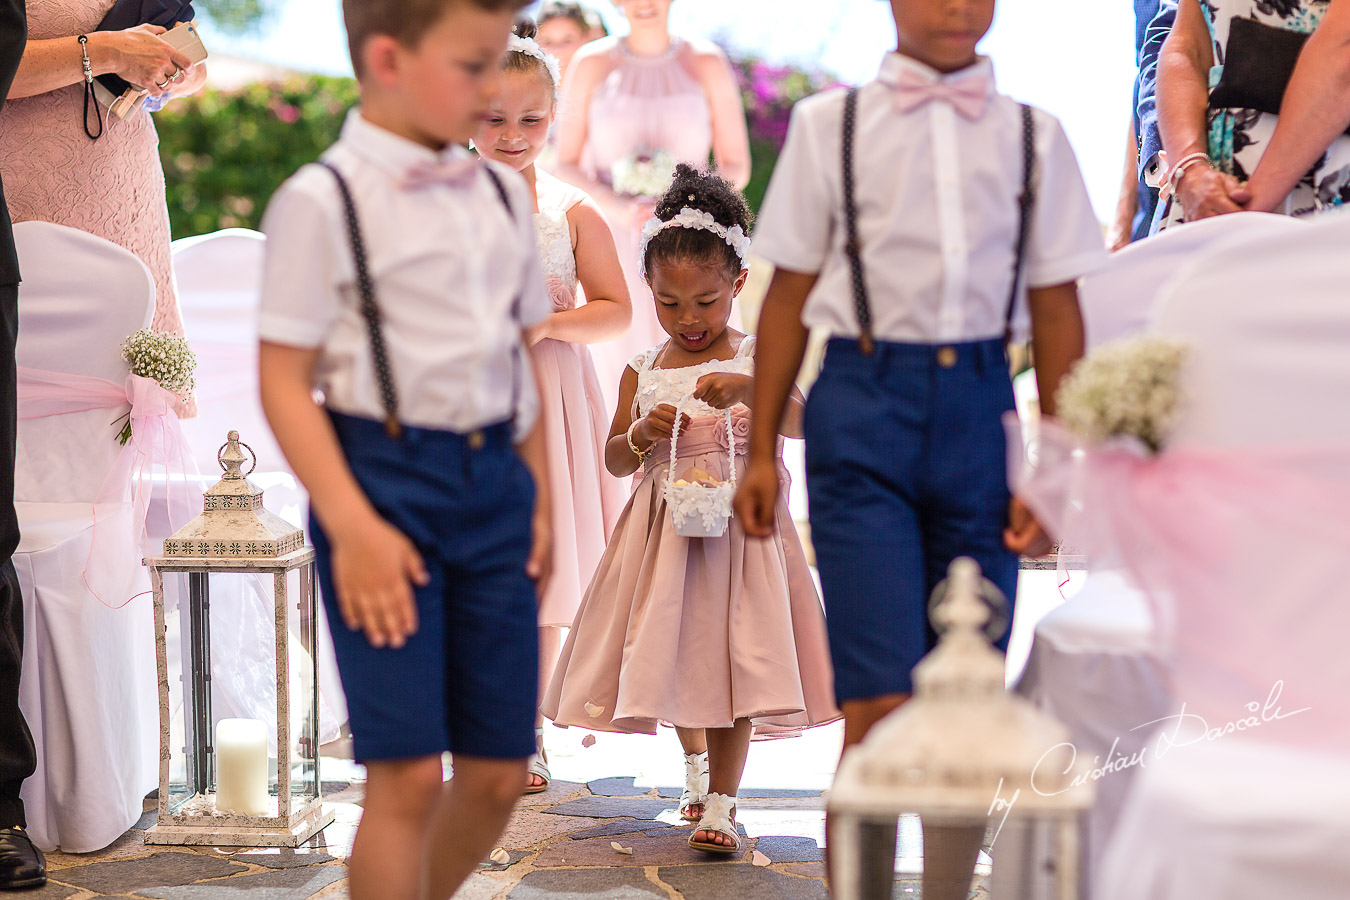 Moments with pageboys and flowergirls captured during a wedding at Aphrodite Hills Resort in Cyprus by Cyprus Photographer Cristian Dascalu.